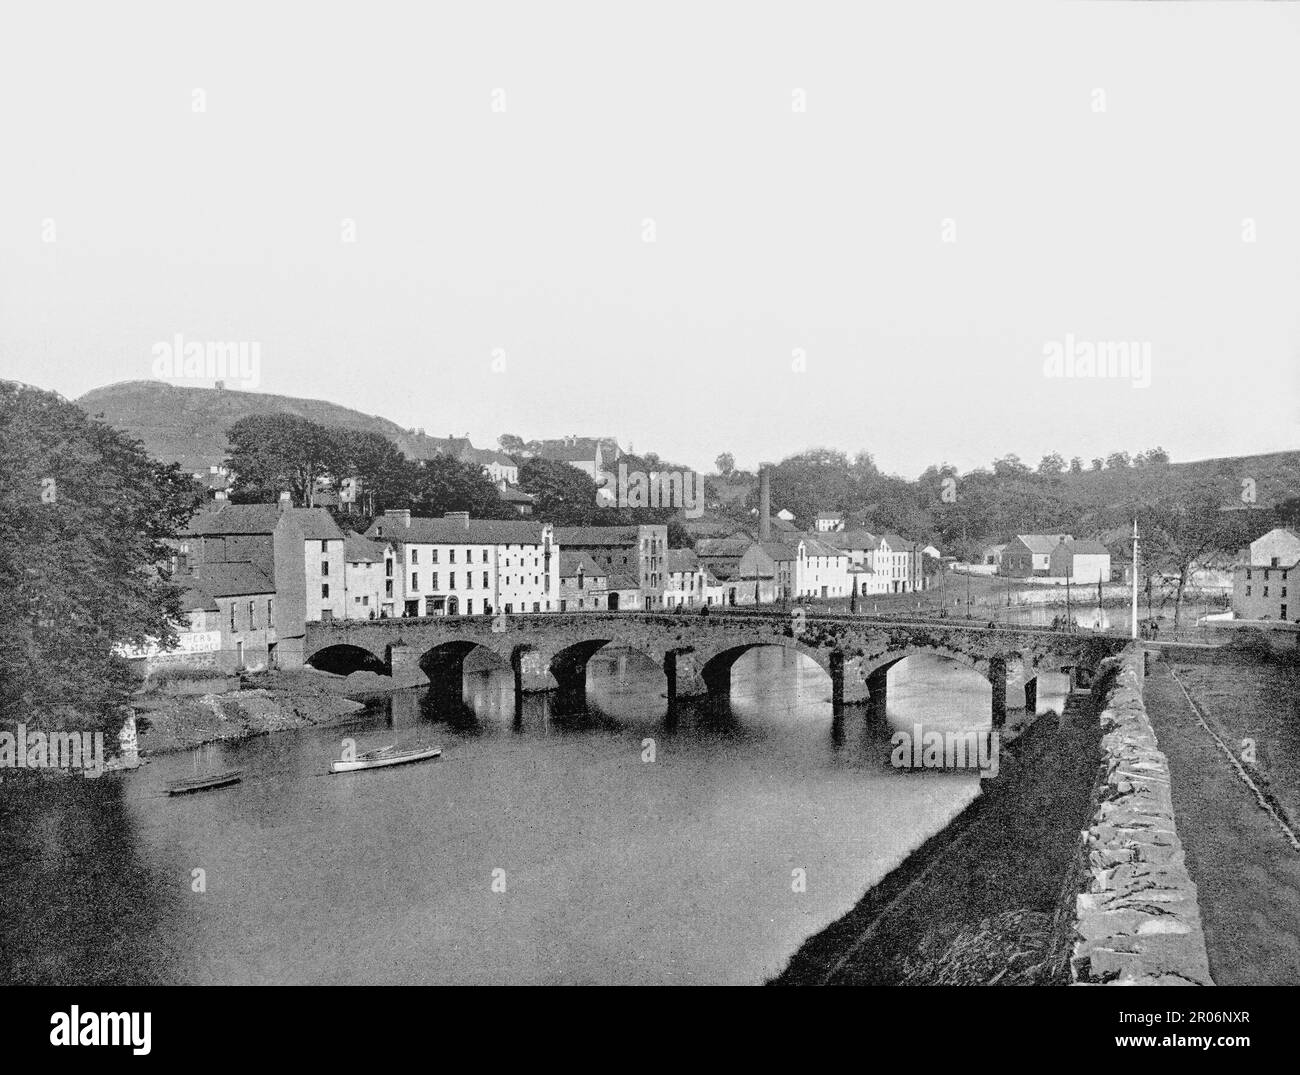 A late 19th century view of Enniscorthy located on the picturesque River Slaney in County Wexford, Ireland. The tower on Vinegar Hill  hill (left background) overlooking the town, was the largest camp and headquarters of the rebels of 1798 who controlled County Wexford for thirty days against vastly superior forces, before their defeat on 21 June. Stock Photo